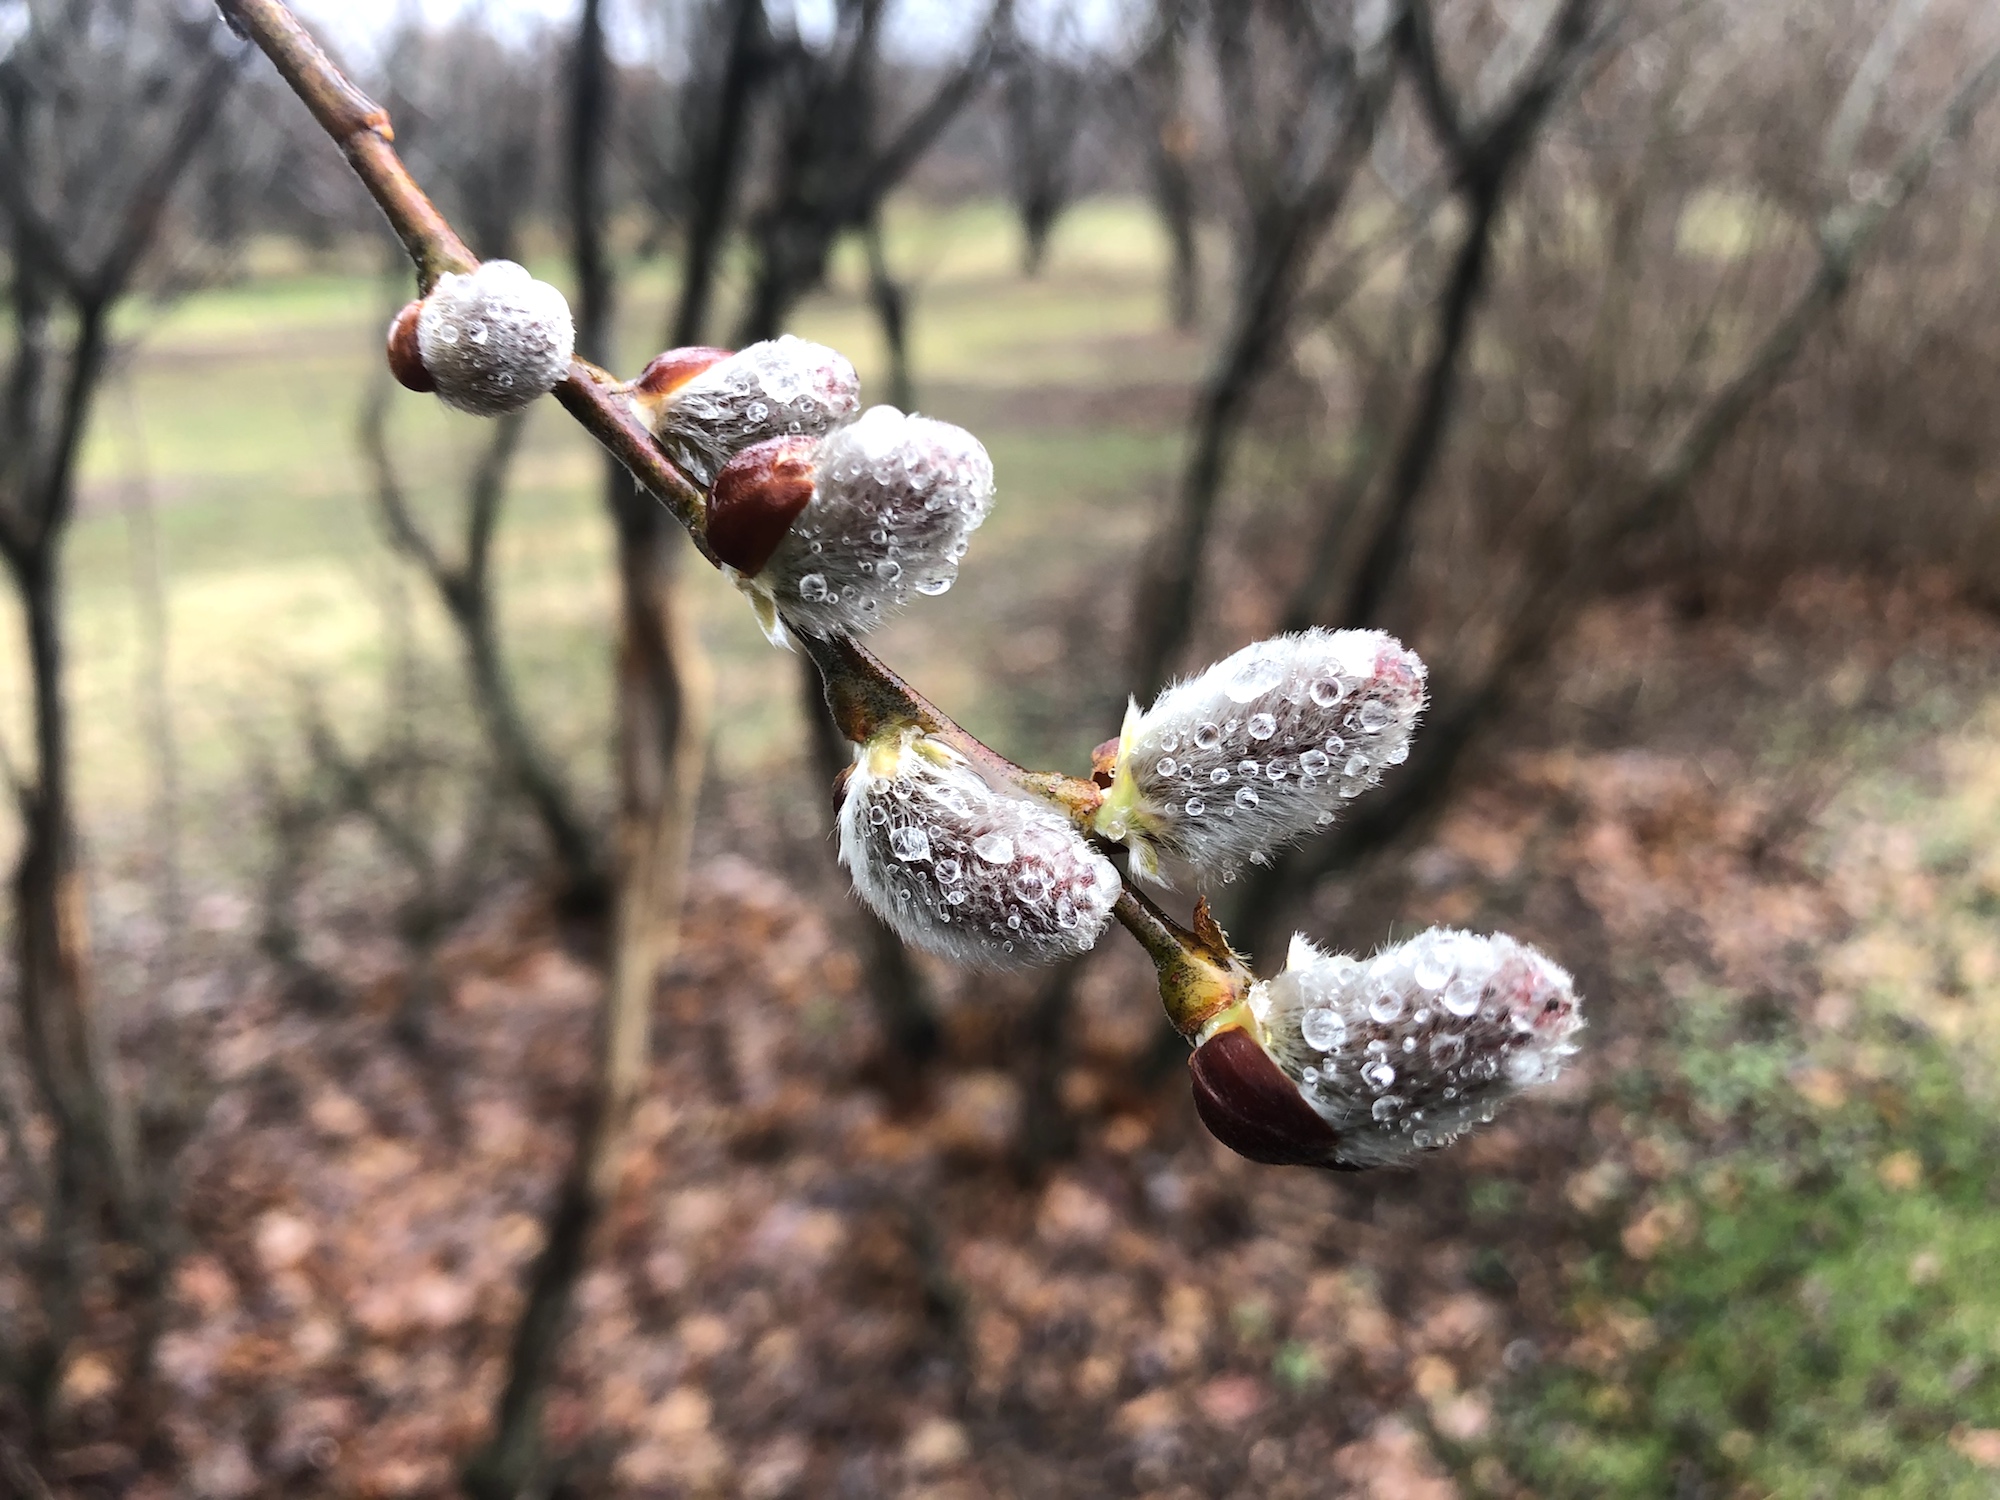 Giant Pussy Willow in UW-Madison Arboretum on March 24, 2021.